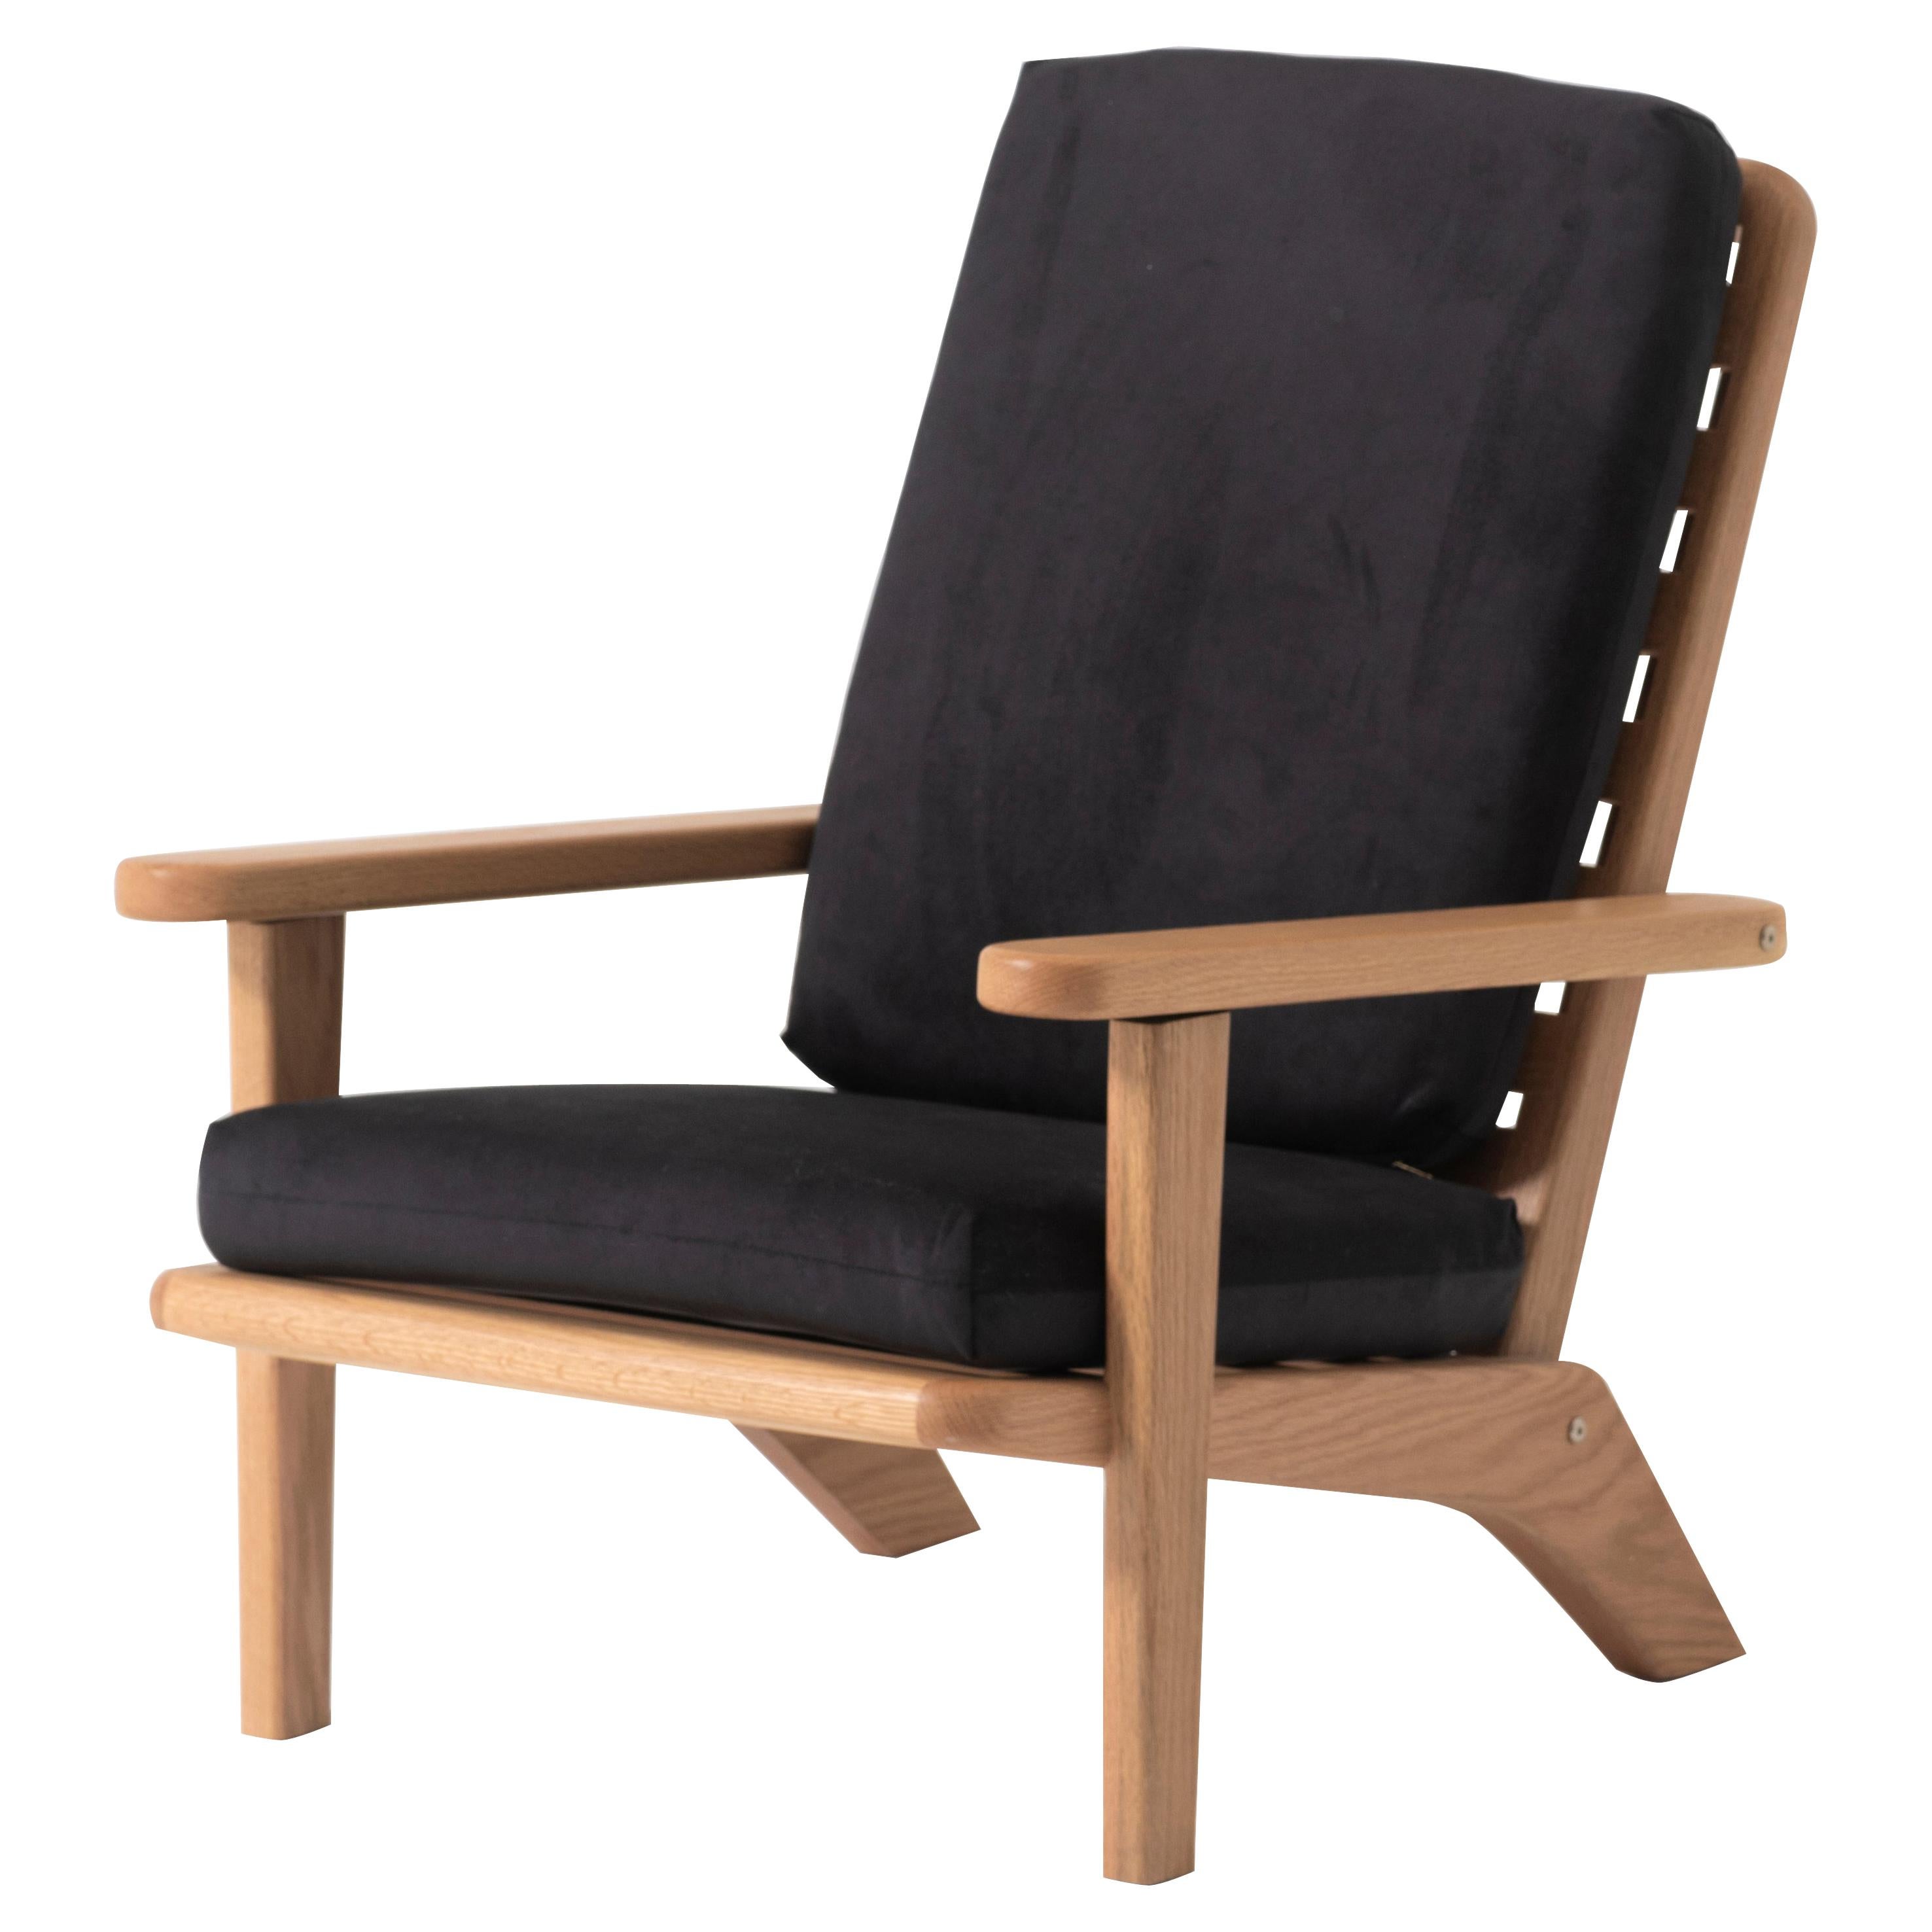 Lounge Chair in Solid Oak Wood with Black Textile Cushion and Reclining Backrest